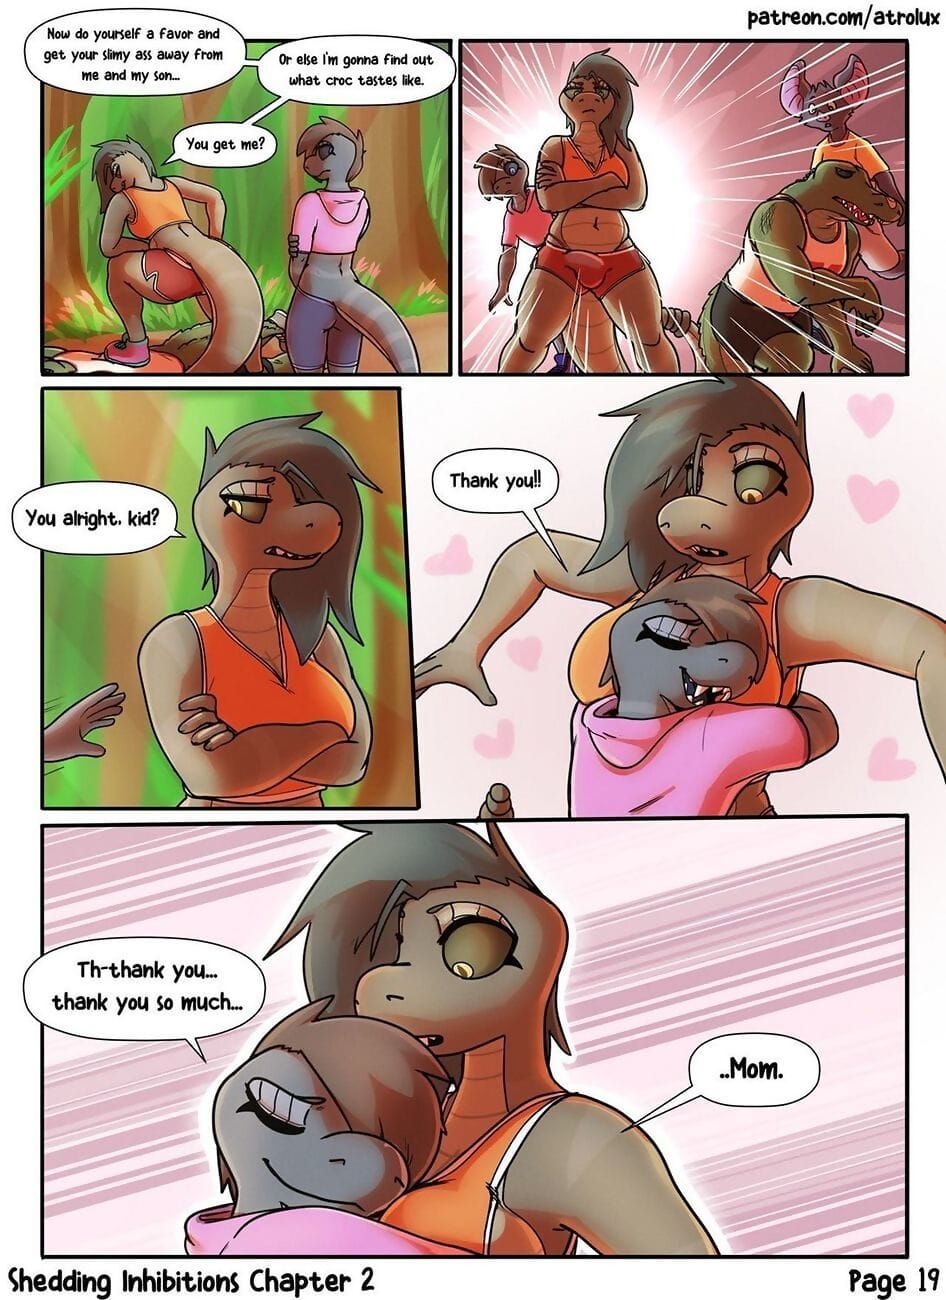 Shedding Inhibitions 2 - Its Complicateâ€¦ - part 3 page 1